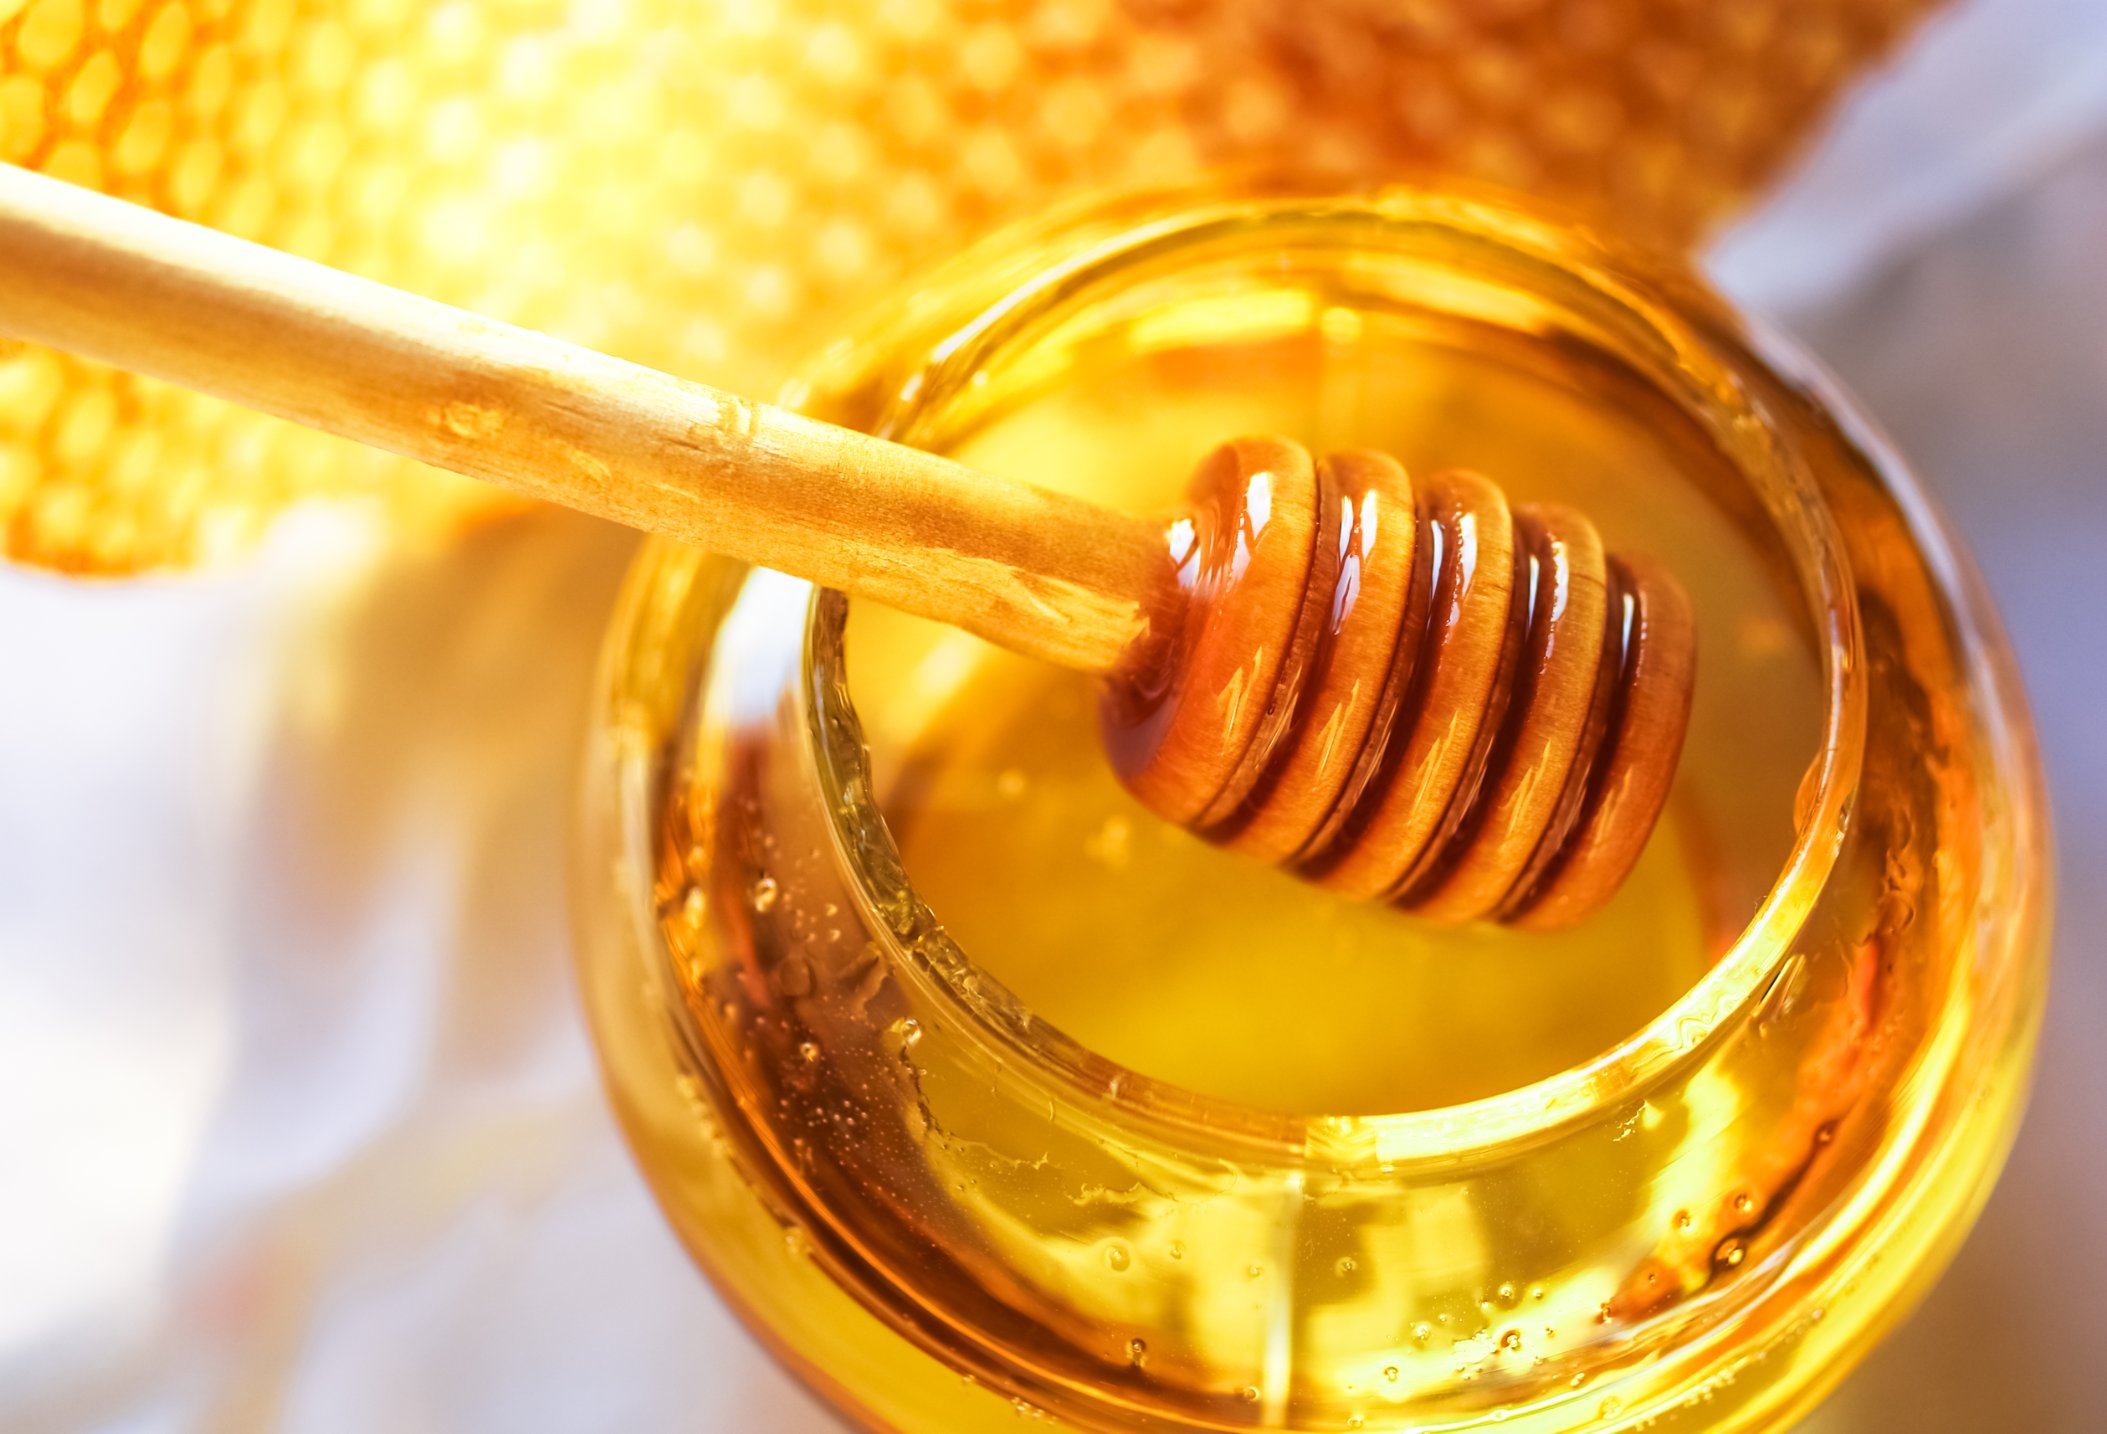 Health benefits of honey: Here's what's proven | CNN